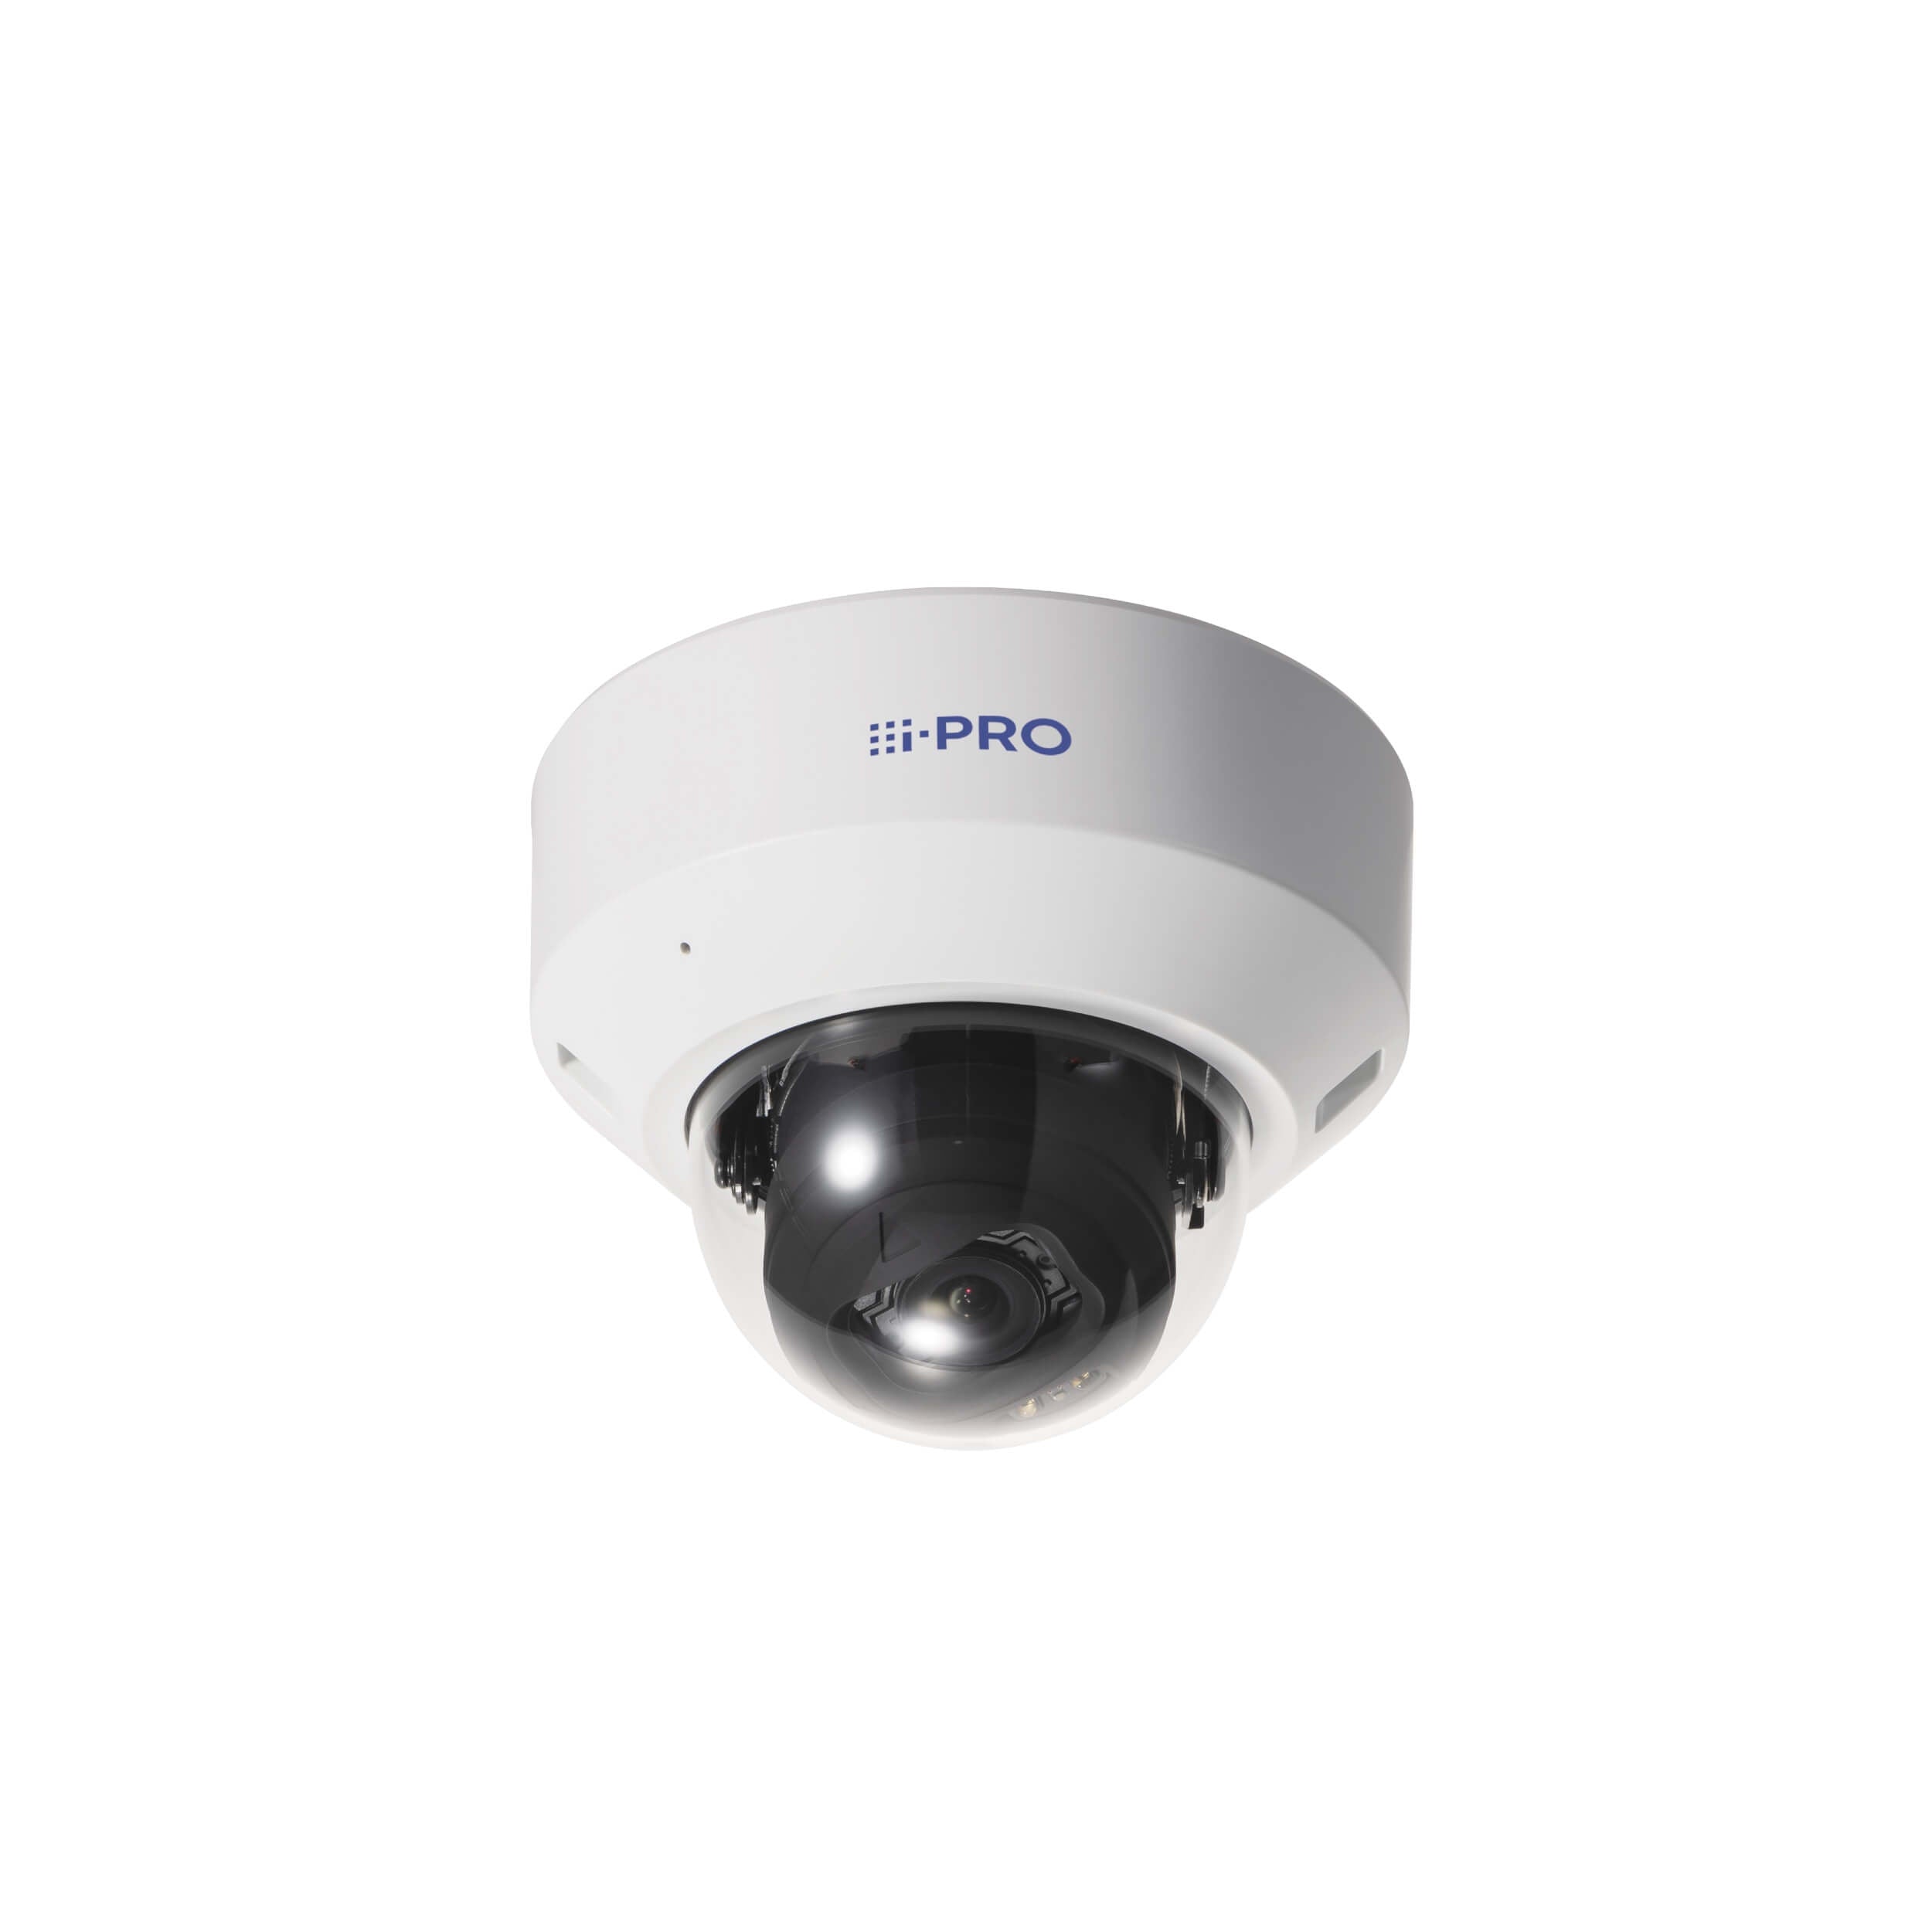 Panasonic WV-S22500-F6L 5MP Vandal Resistant Indoor Dome Network Camera with AI Engine with 6.1mm Lens